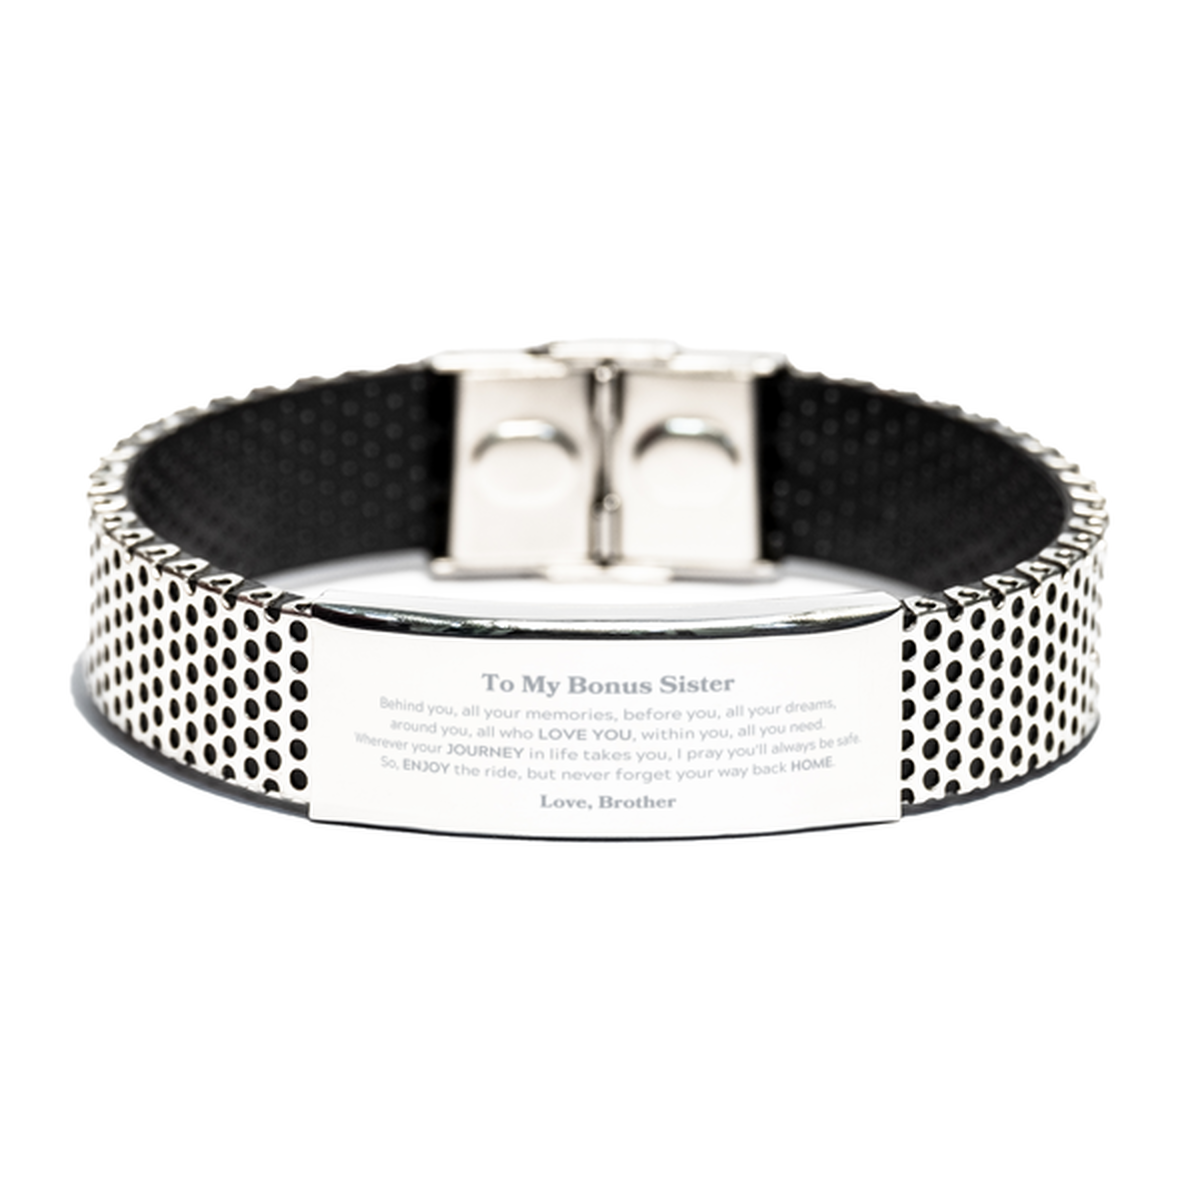 To My Bonus Sister Graduation Gifts from Brother, Bonus Sister Stainless Steel Bracelet Christmas Birthday Gifts for Bonus Sister Behind you, all your memories, before you, all your dreams. Love, Brother